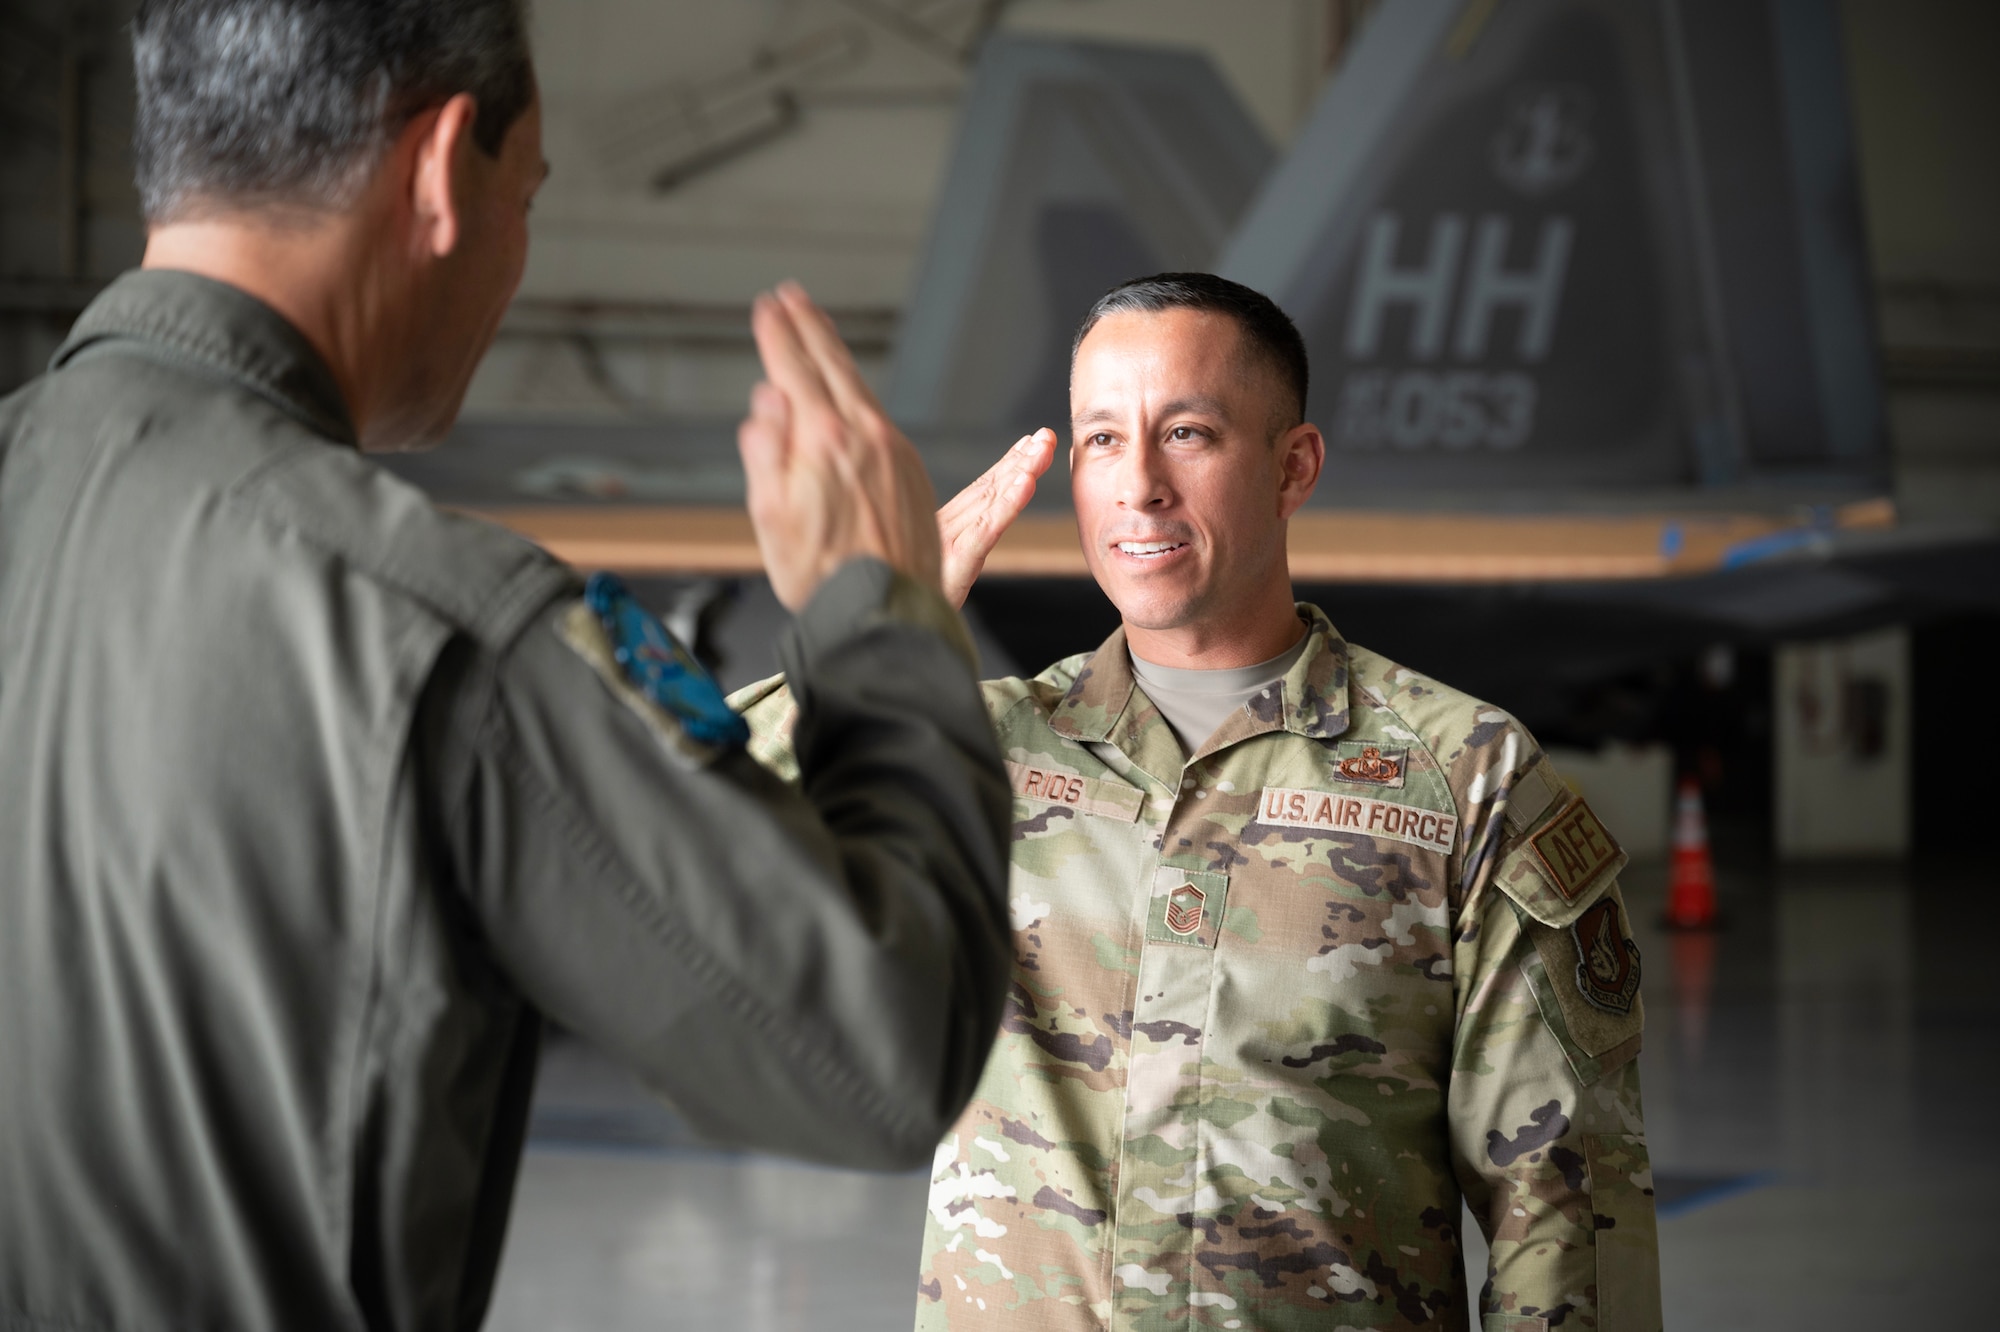 U.S. Air Force Senior Master Sgt. Ryan Rios, command aircrew flight equipment manager, salutes Gen. Ken Wilsbach, Pacific Air Forces commander, after receiving recognition for his outstanding performance during the Next Generation Aircrew Protection Step-Launch and Recover demonstration at Joint-Base Pearl Harbor-Hickam, Hawaii, May 11, 2023. Rios’ team demonstrated the PACAF stop gap for the F-22 Aircrew CBRN limiting factor utilizing the modified M-50 ground crew mask. They also demonstrated how these operationally relevant capabilities provide Gen. Wilsbach with commander’s decision superiority to generate combat sorties safely in a Chemical environment while maximizing aircrew performance. (U.S. Air National Guard photo by Master Sgt. Mysti Bicoy)